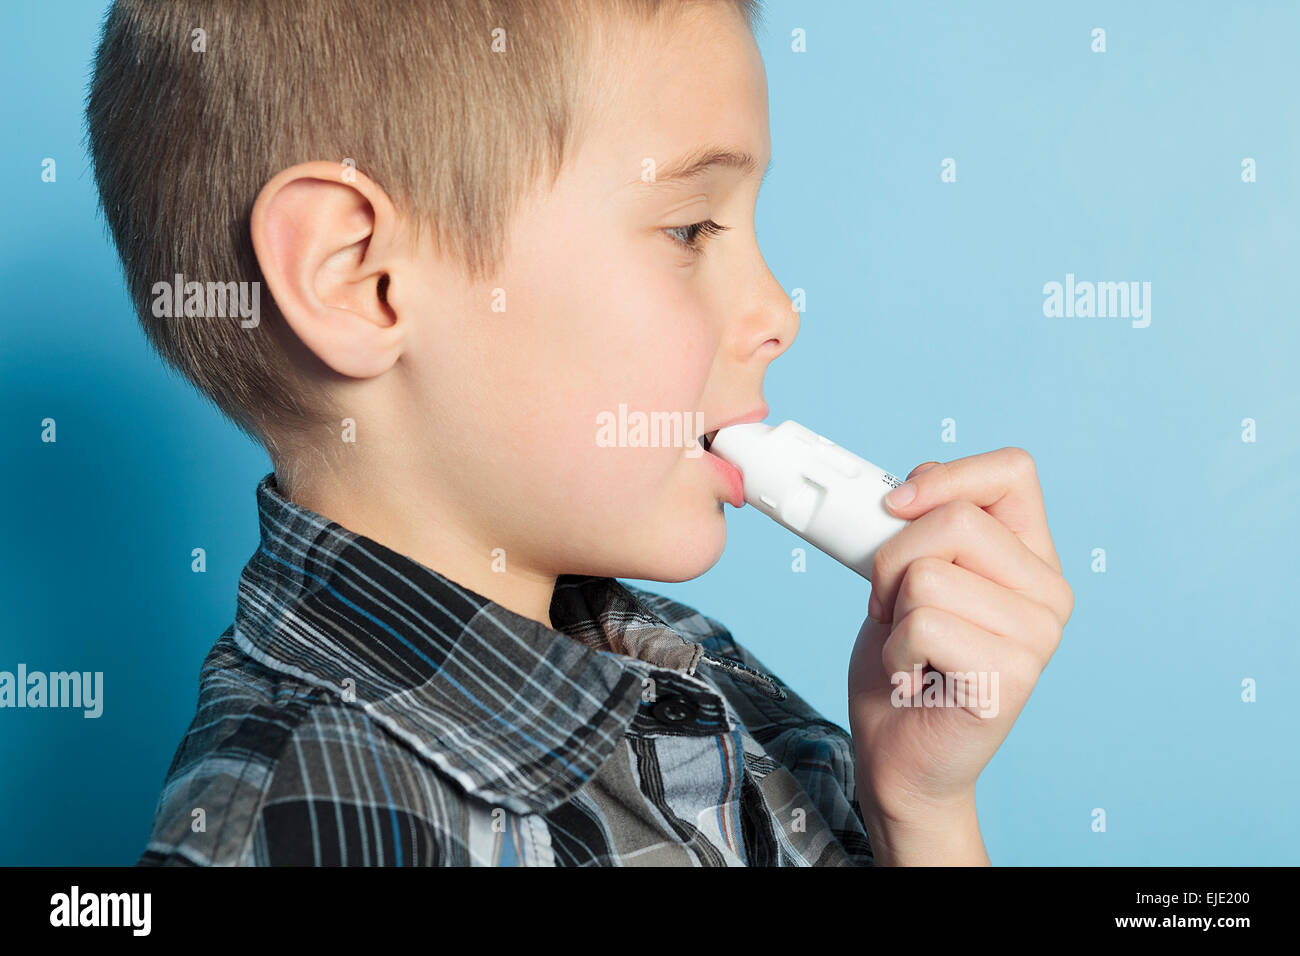 asthma boy with is inhalator over blue background Stock Photo